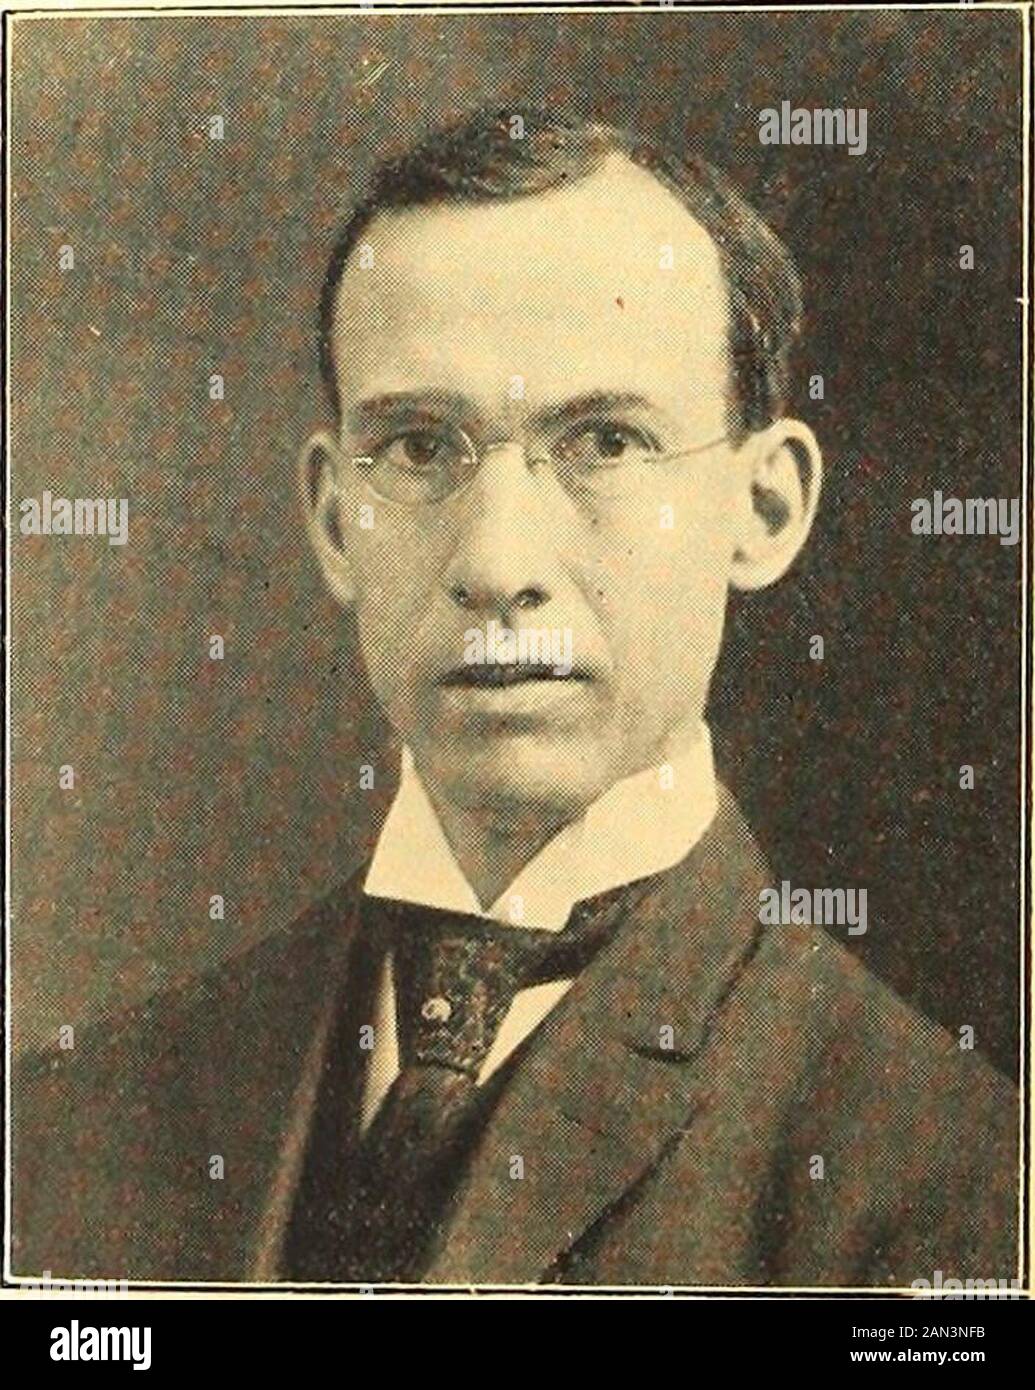 Colorado College Nugget (yearbook) . Frank H. Loud, Ph. D., Phi Beta Kappa— Professor of Mathematics and Astronomy; A.B. (Amherst), 1873; A. M.  (Harvard),1899; Ph. D. (Haverford), 1901; ColoradoCollege, 1877. George J.  Lyon,